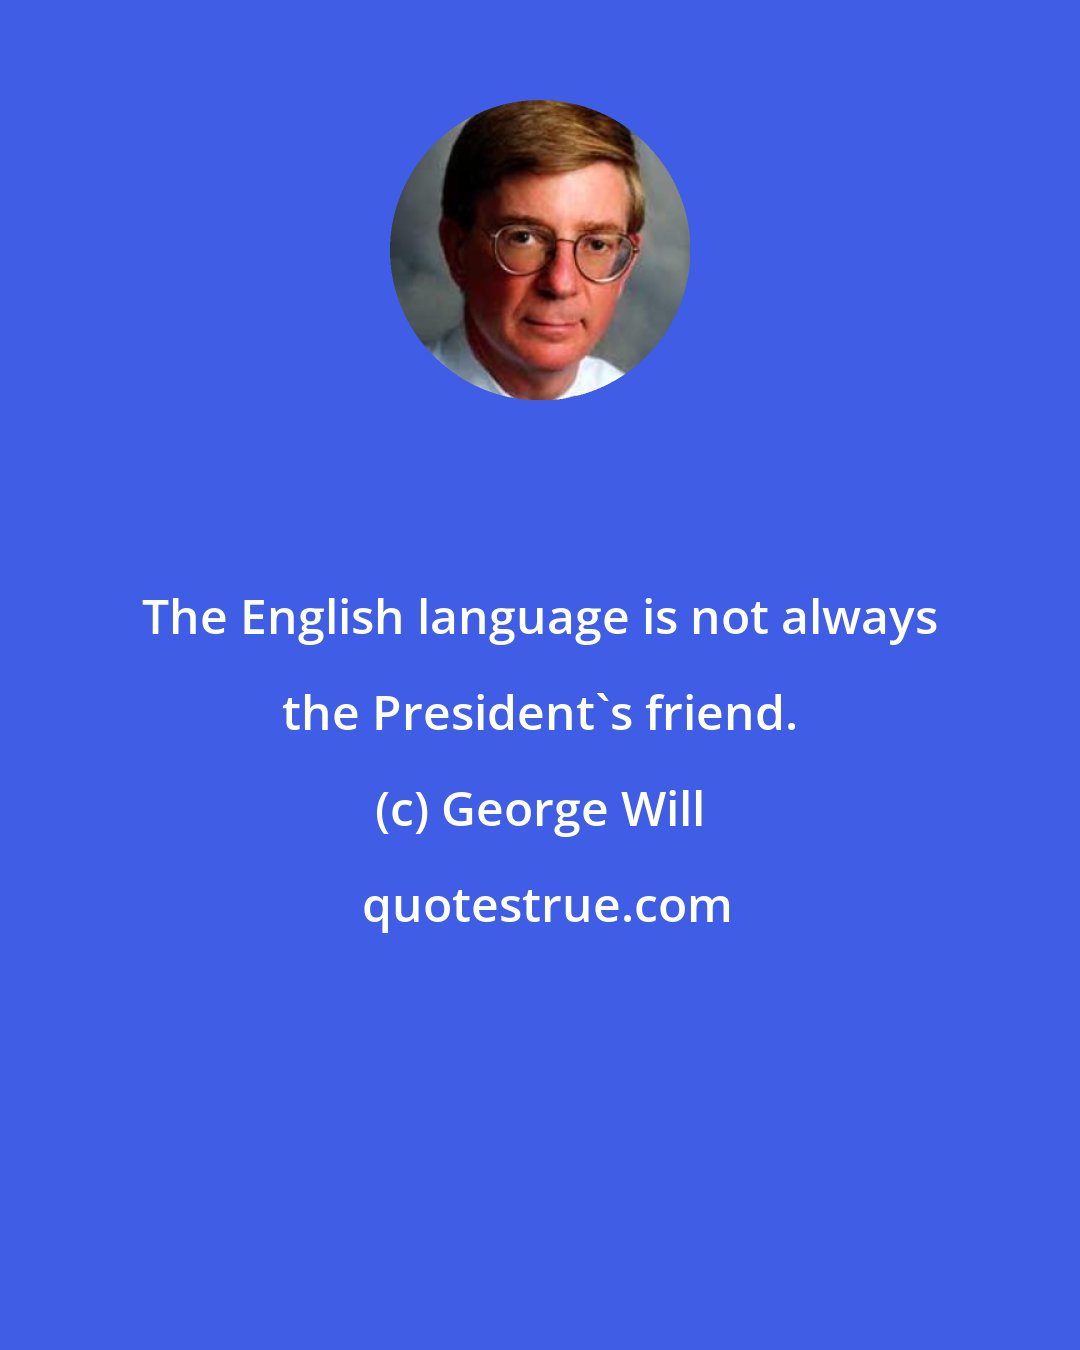 George Will: The English language is not always the President's friend.